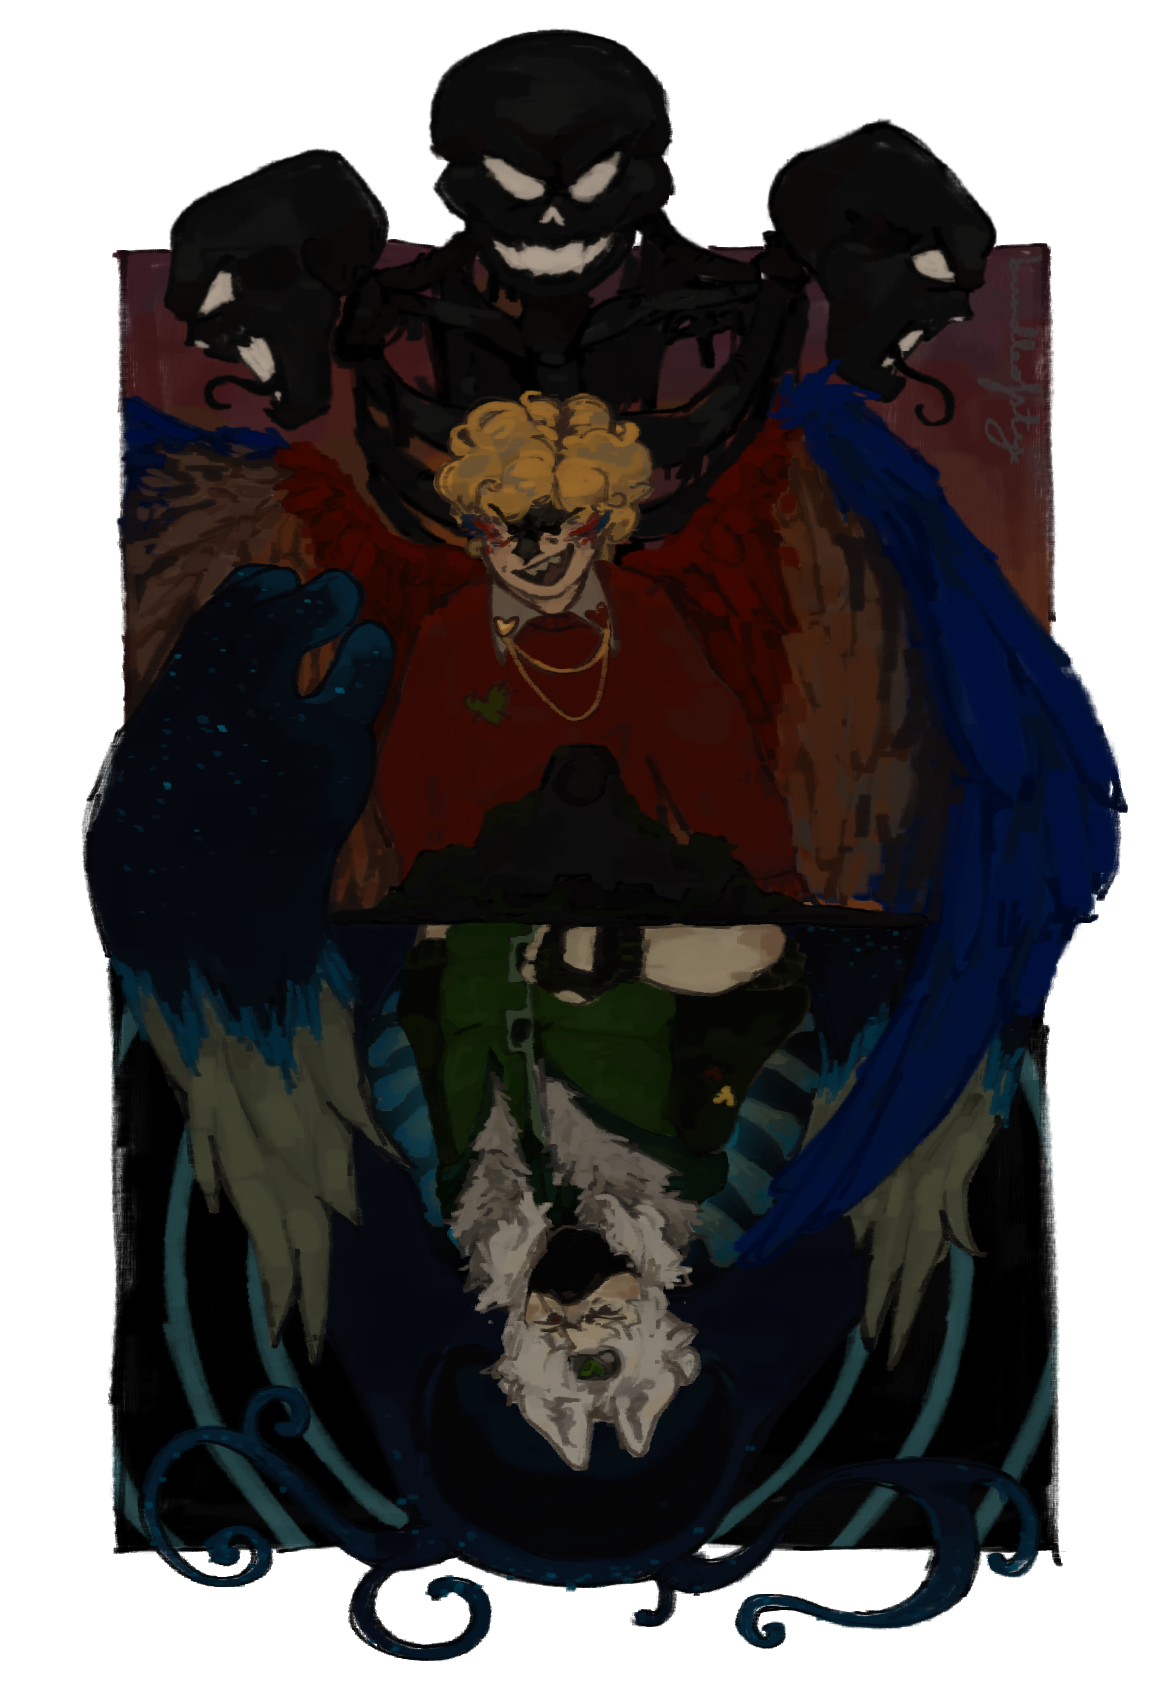 A digital painting of Grian and Etho in session 6 of Secret Life. The top half of the piece is dedicated to Grian, who is smirking in front of the Wither. He is drawn with large macaw wings. The bottom half of the piece is upside-down. It shows Etho, looking more hesitant than Grian, in front of the Warden. The Warden's hand stretches into Grian's side, mirroring how Grian's wing stretches into Etho's side.